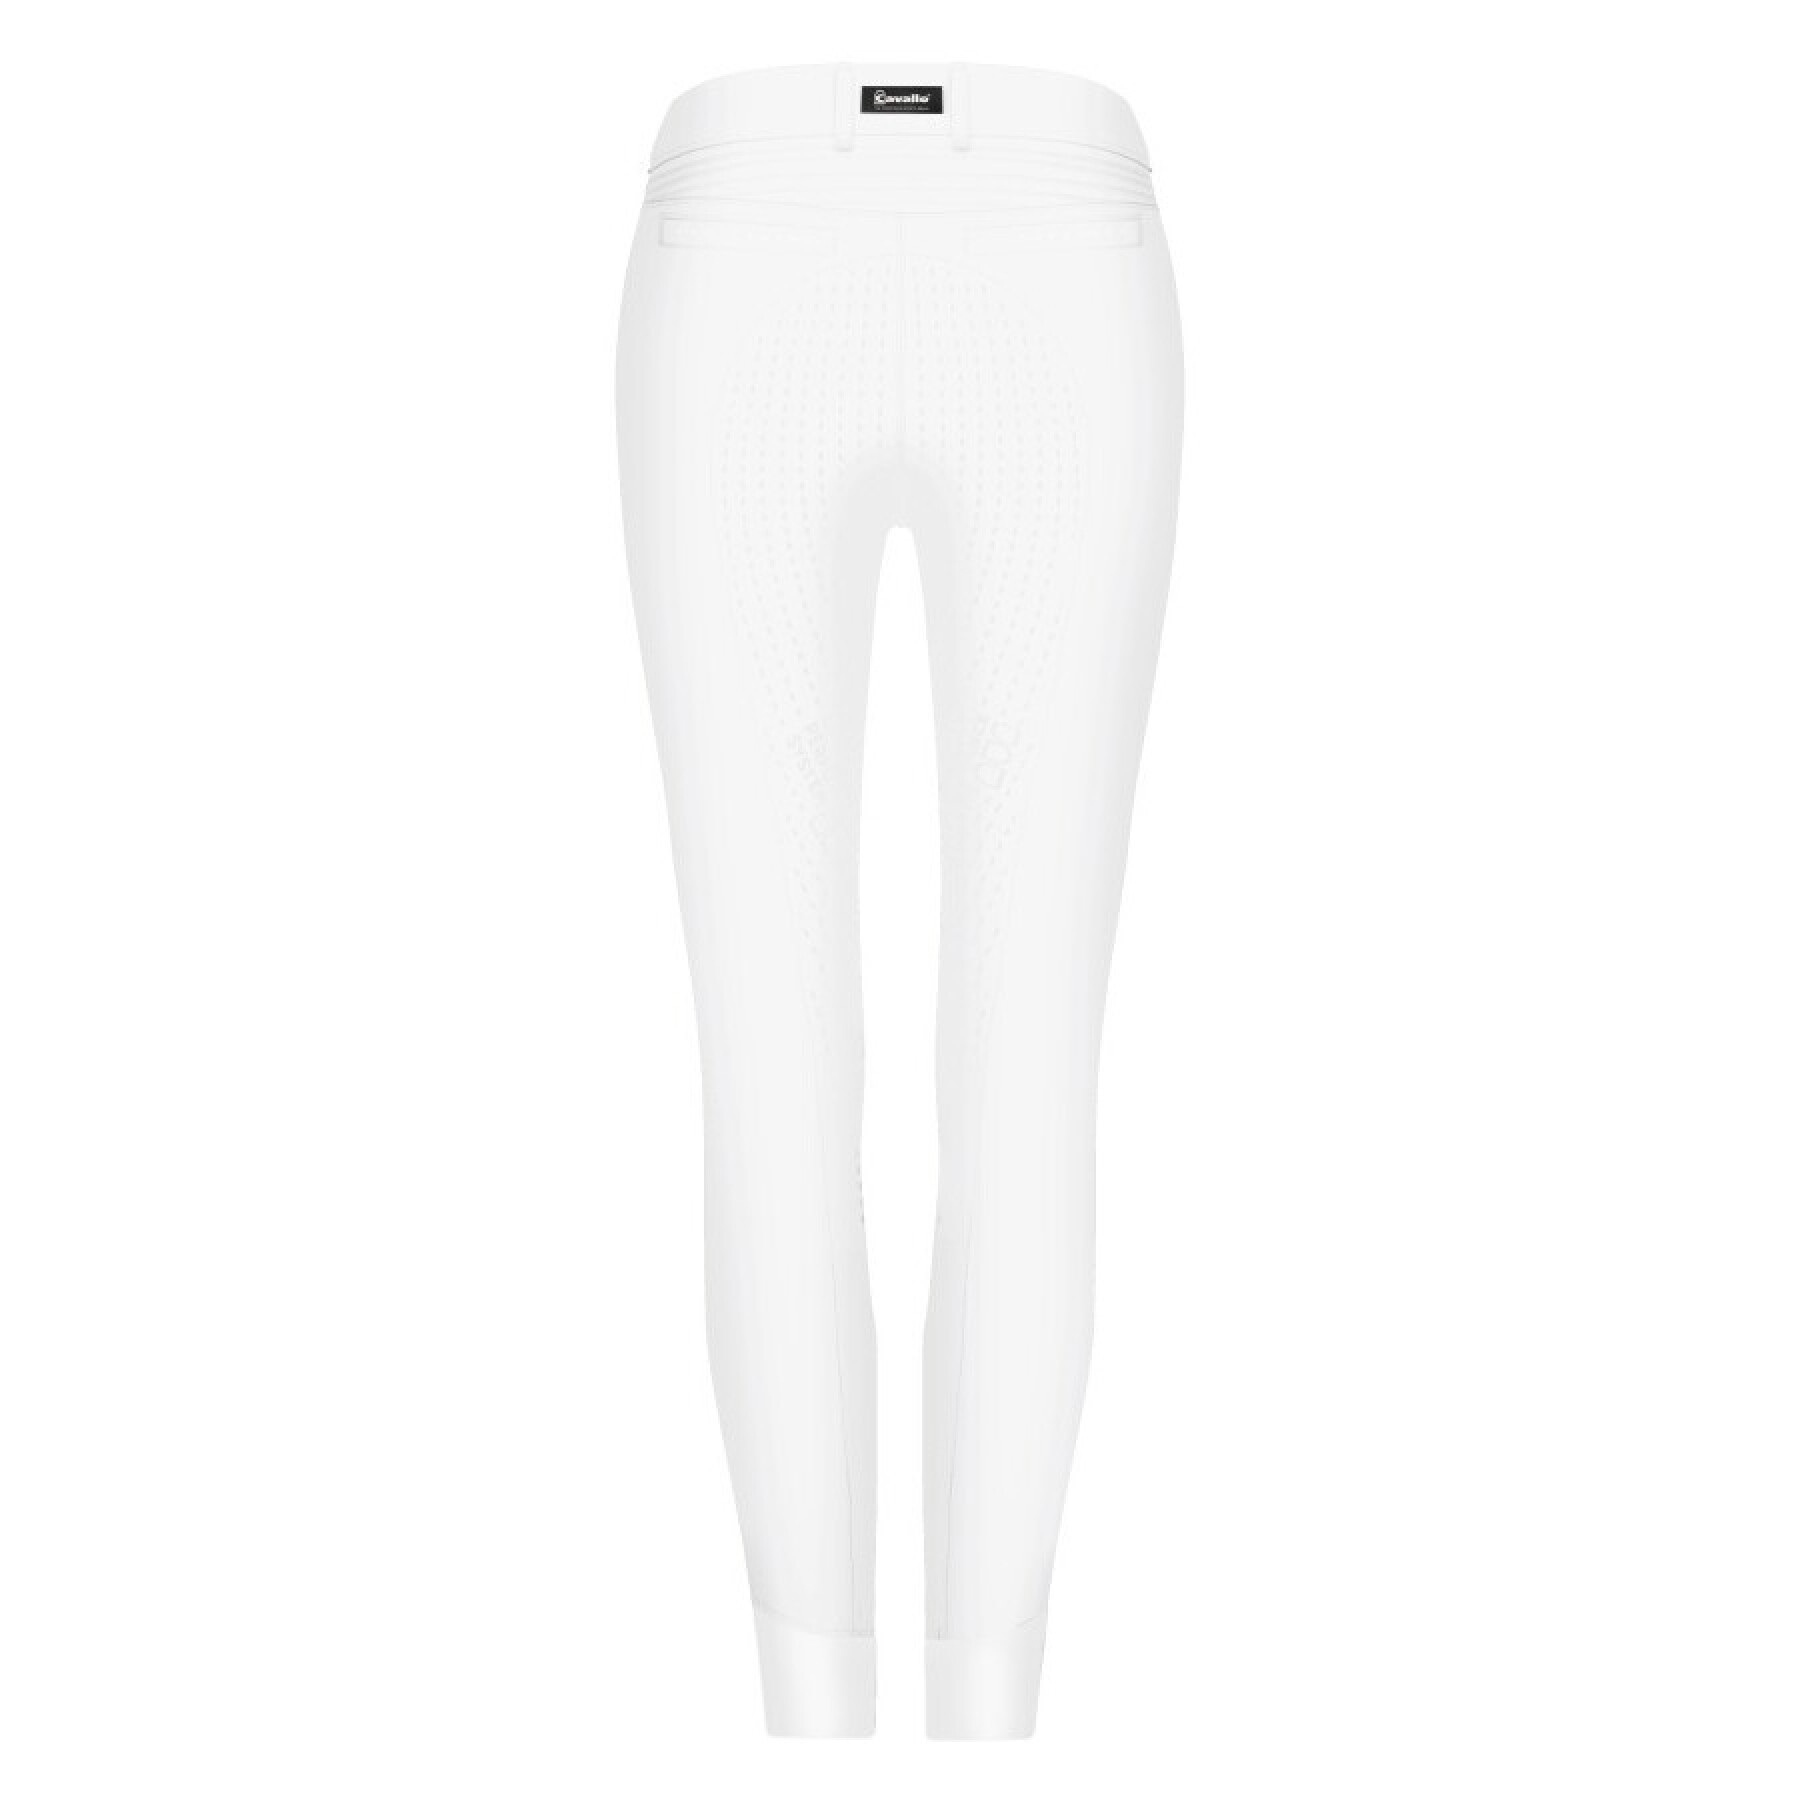 Women's full grip competition pants Cavallo Cavacalima